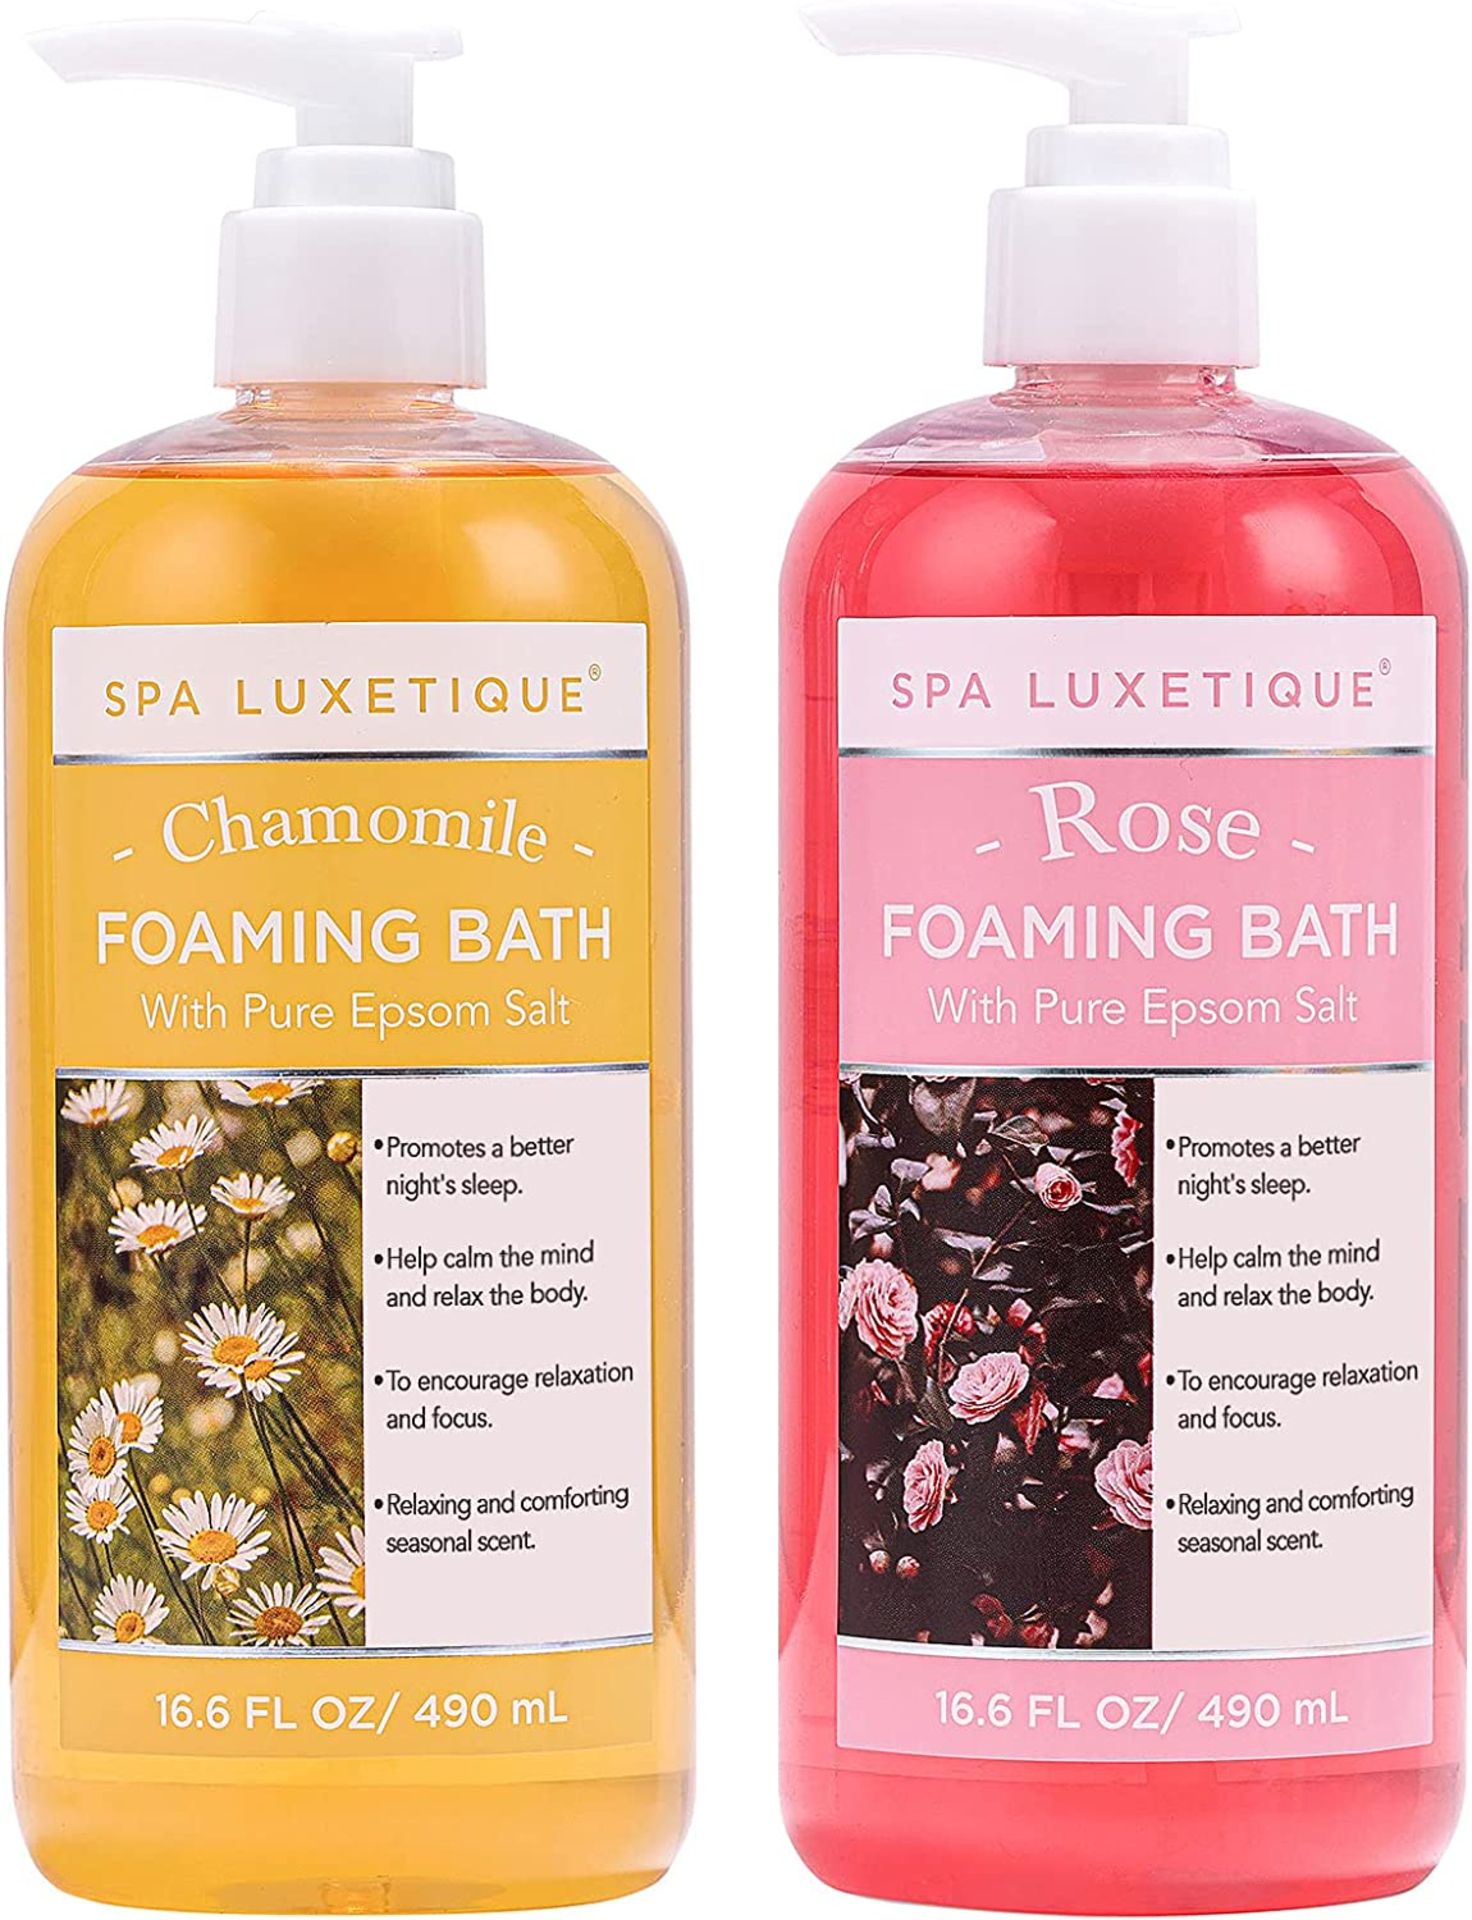 Shower Gel, Spa Luxetique Bubble Bath Foaming Bath with Pure Epsom Salt, Rose and Chamomile Scent - Image 2 of 2